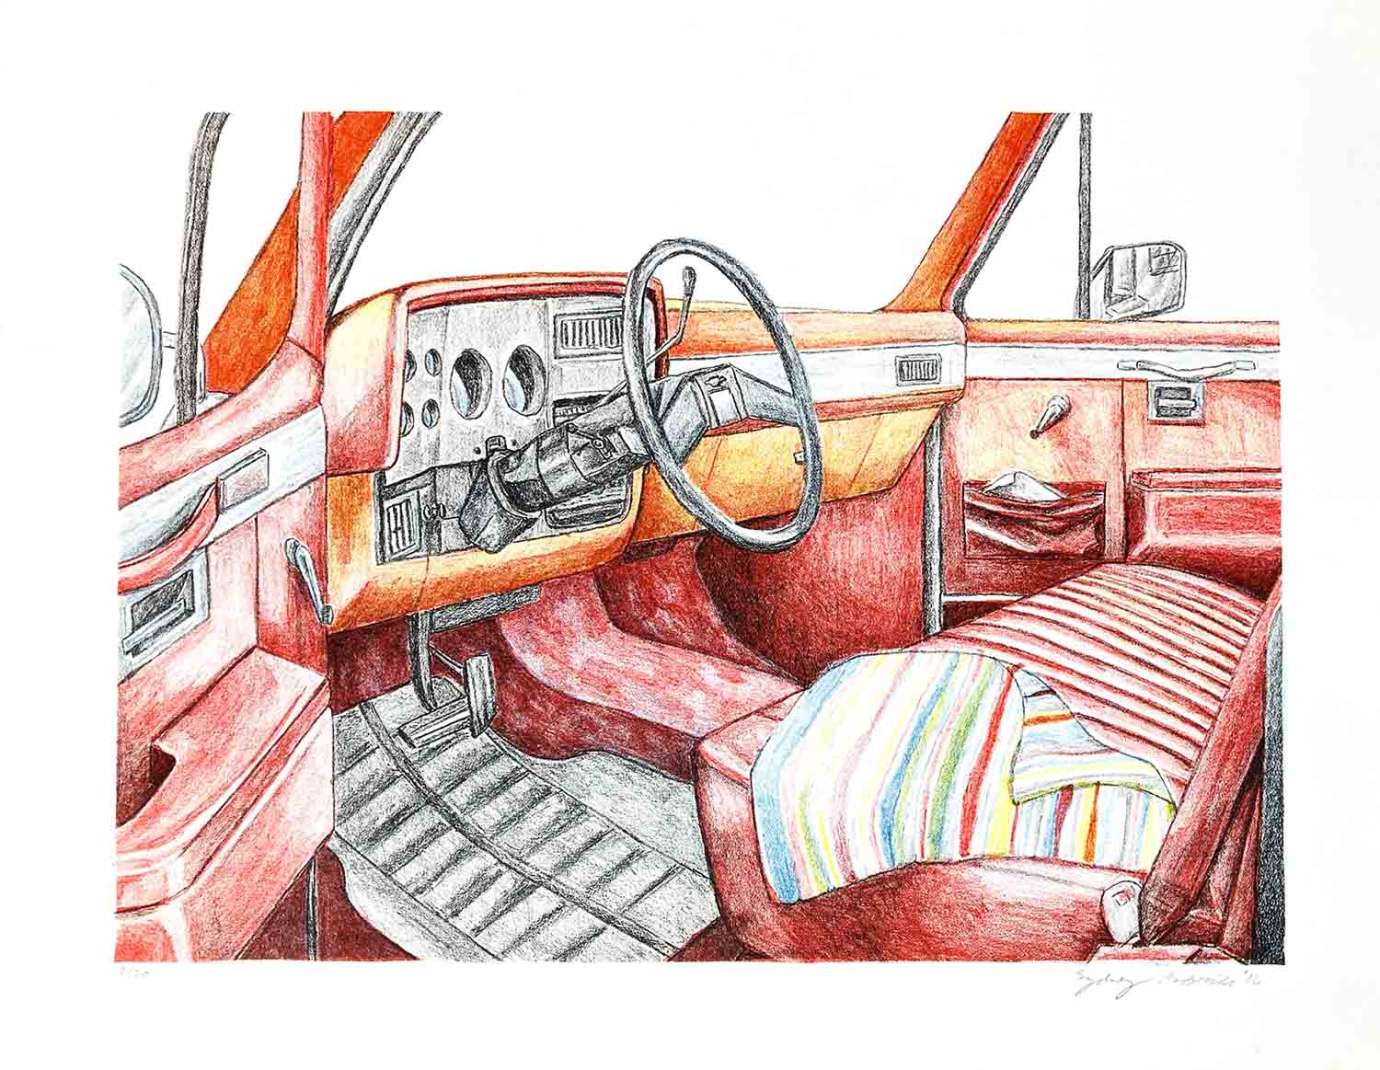 A print by Sydney McBride of the red interior of a car